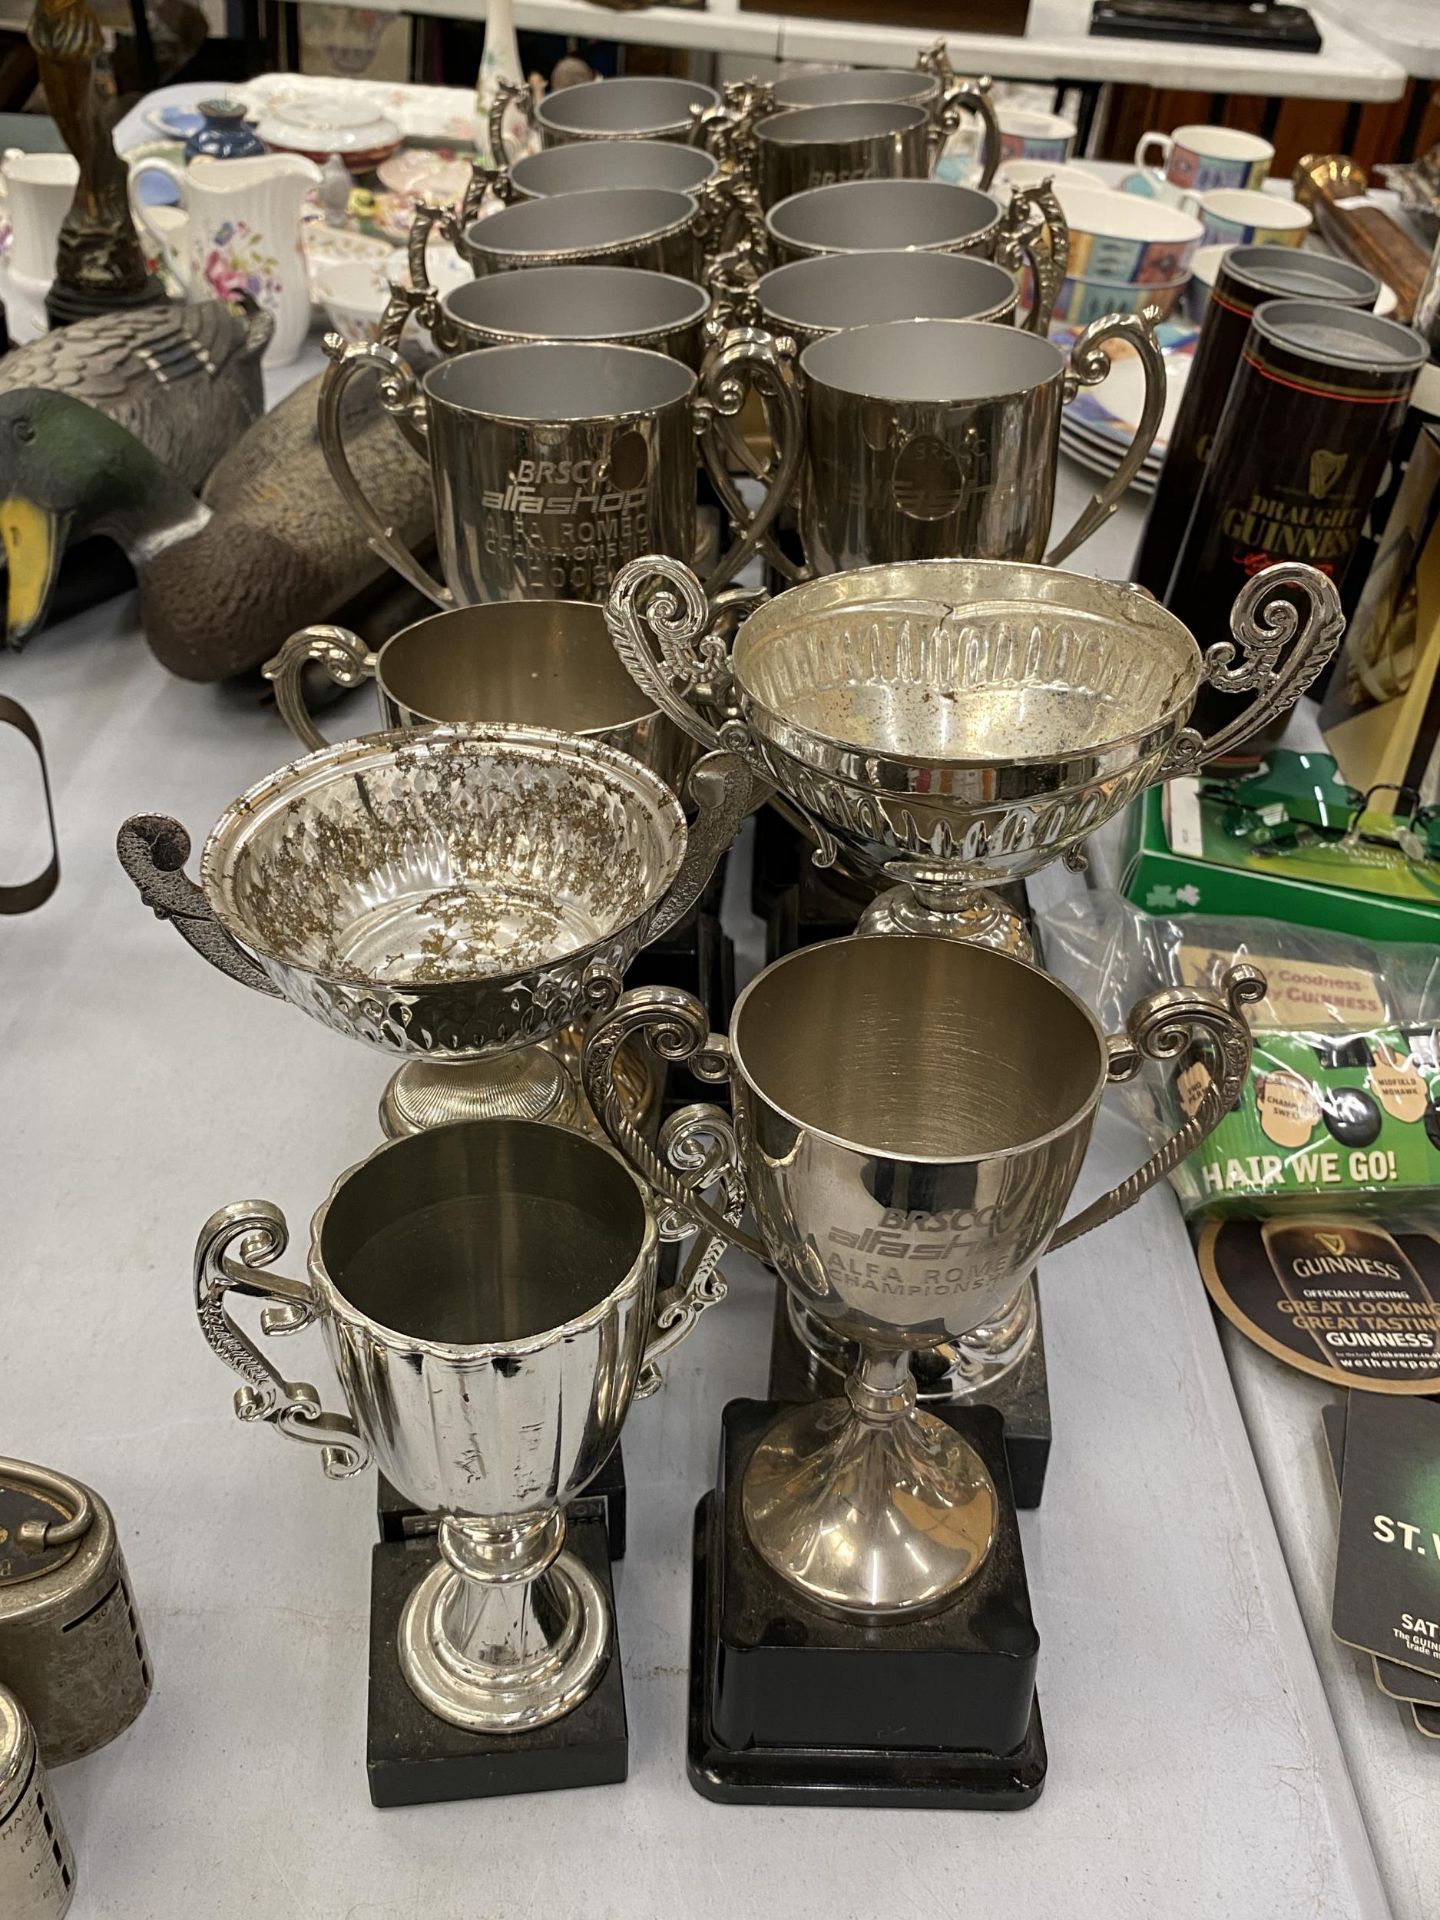 A LARGE COLLECTION OF CUPS AND TROPHIES - 16 IN TOTAL